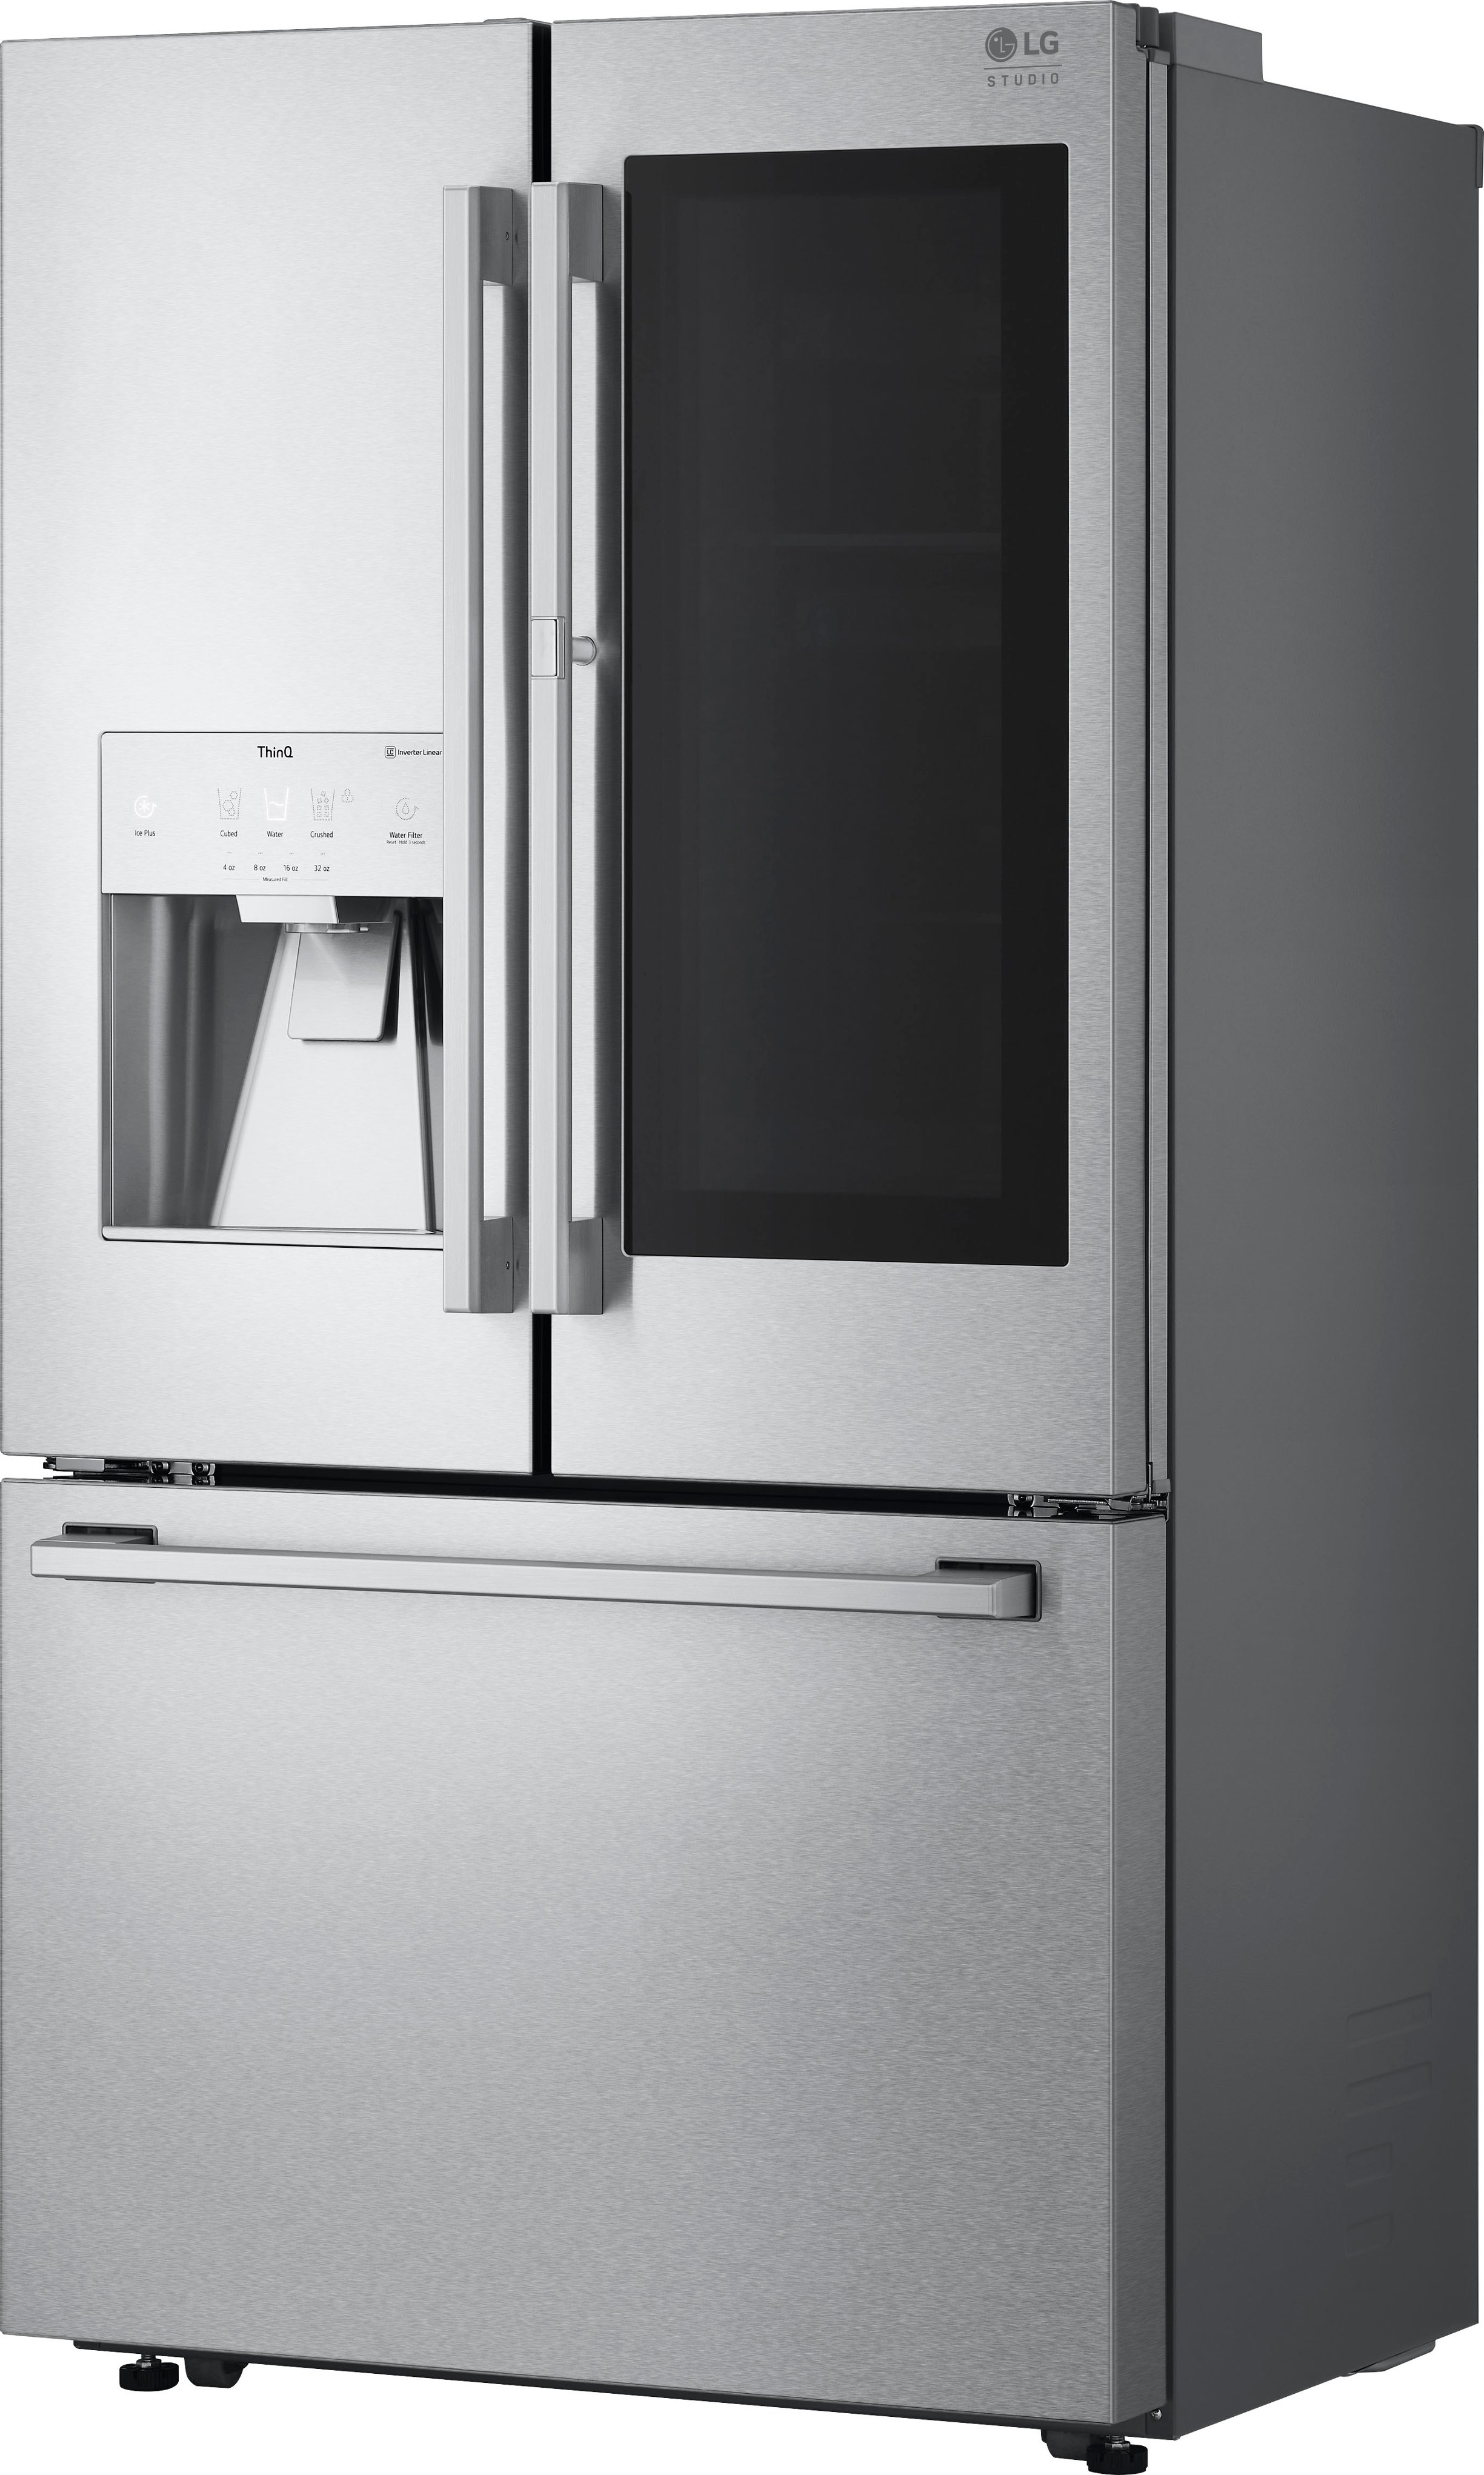 Angle View: LG - STUDIO 23.5 Cu. Ft. French Door Counter-Depth Smart Refrigerator with Craft Ice - Stainless steel